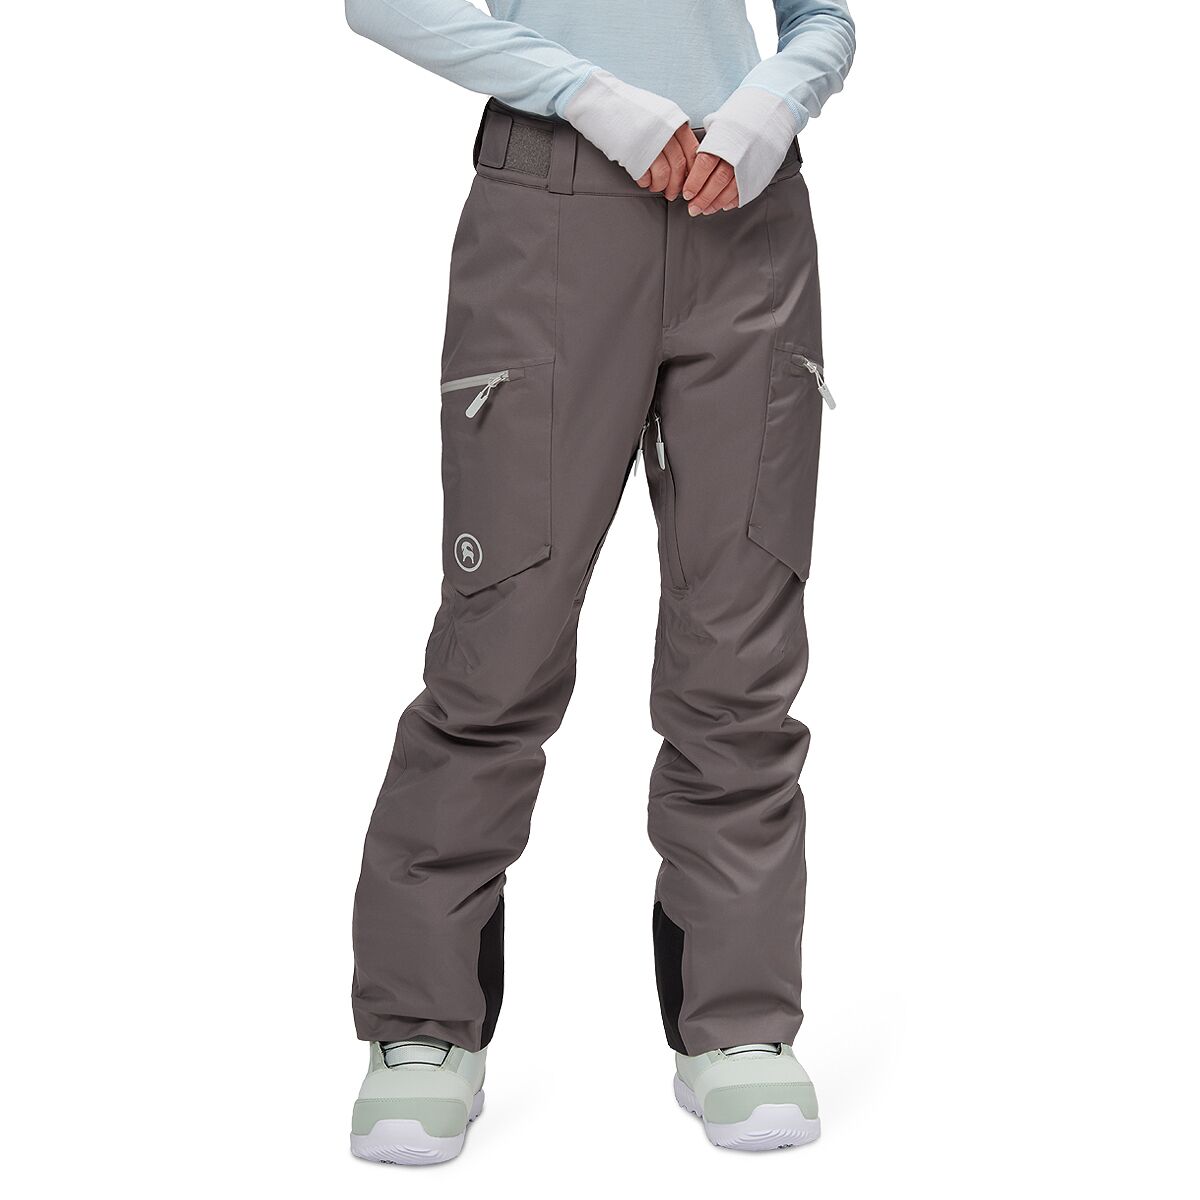 Backcountry Park West Insulated Pant - Women's